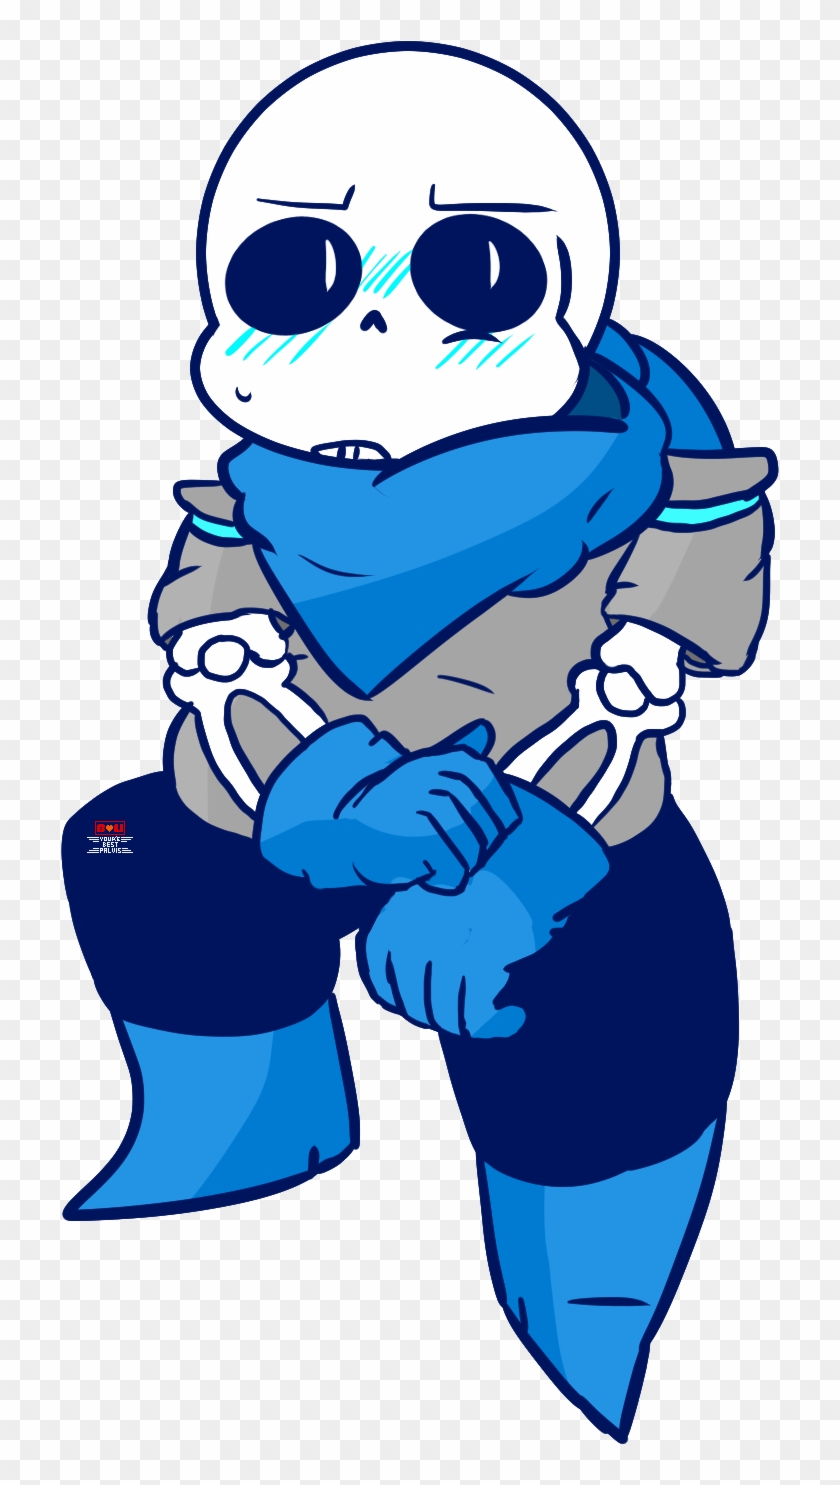 A Flustered Blueberry Sans By Bloody-uragiri - Blueberry Sans Png #765433